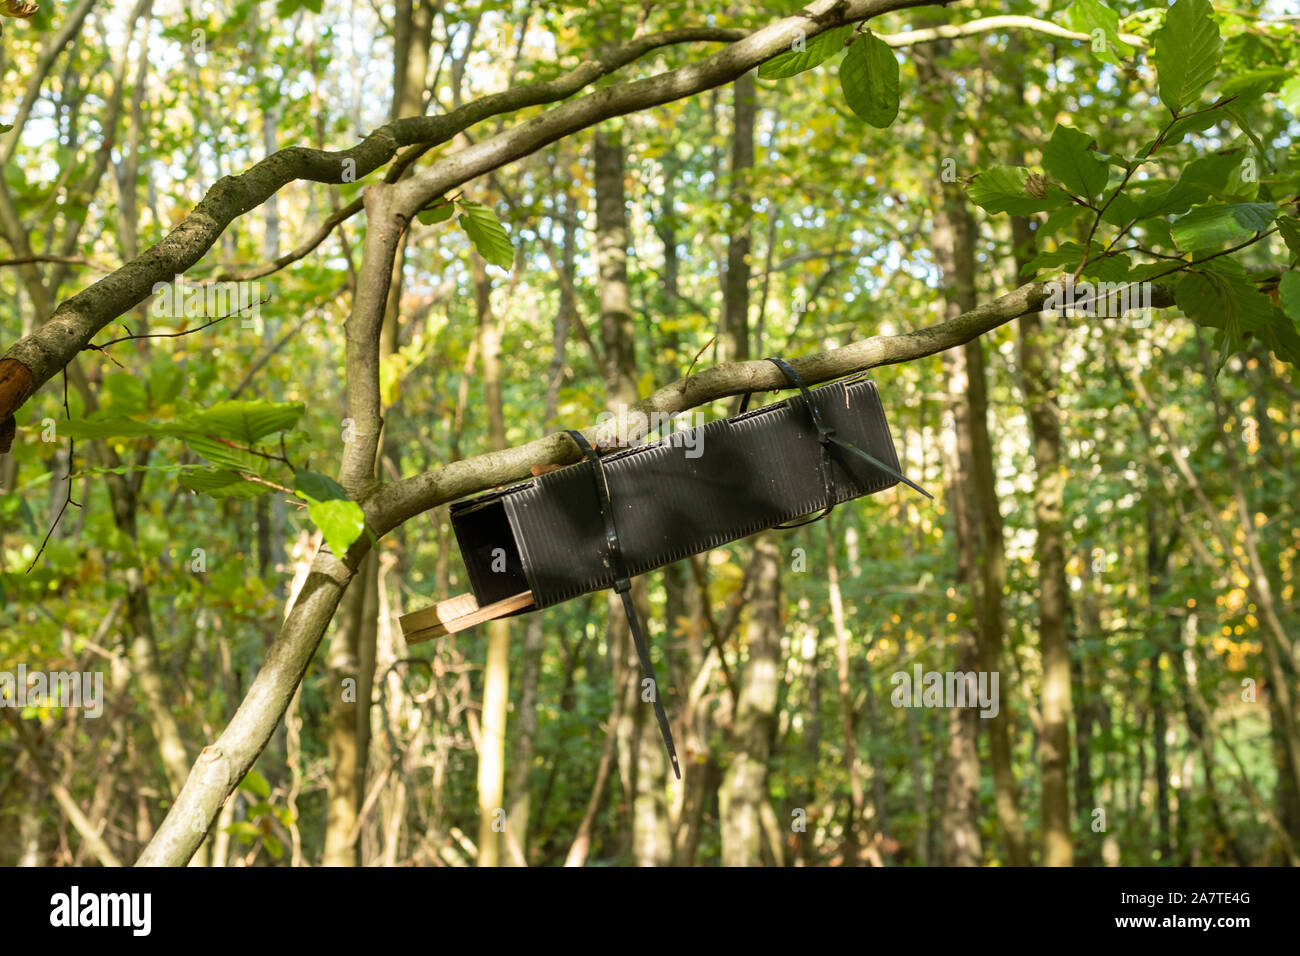 Dormouse tube attached to a tree branch, used to survey or monitor the presence of dormice (Muscardinus avellanarius), a small mammal species, UK Stock Photo